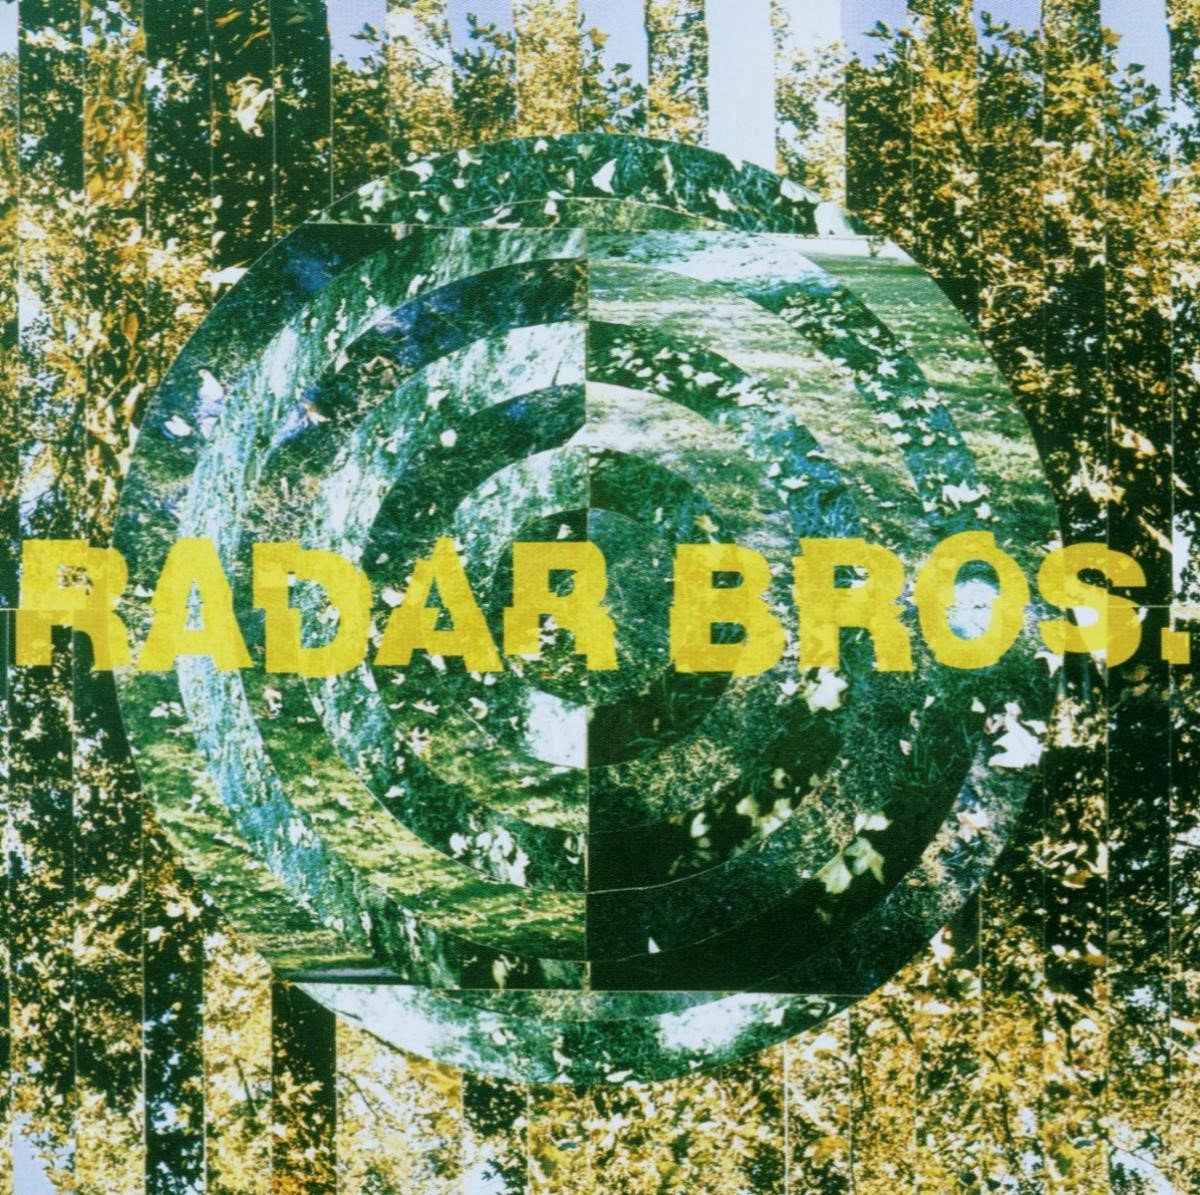 Radar Brothers - The Fallen Leaf Pages (CD) - Radar Brothers